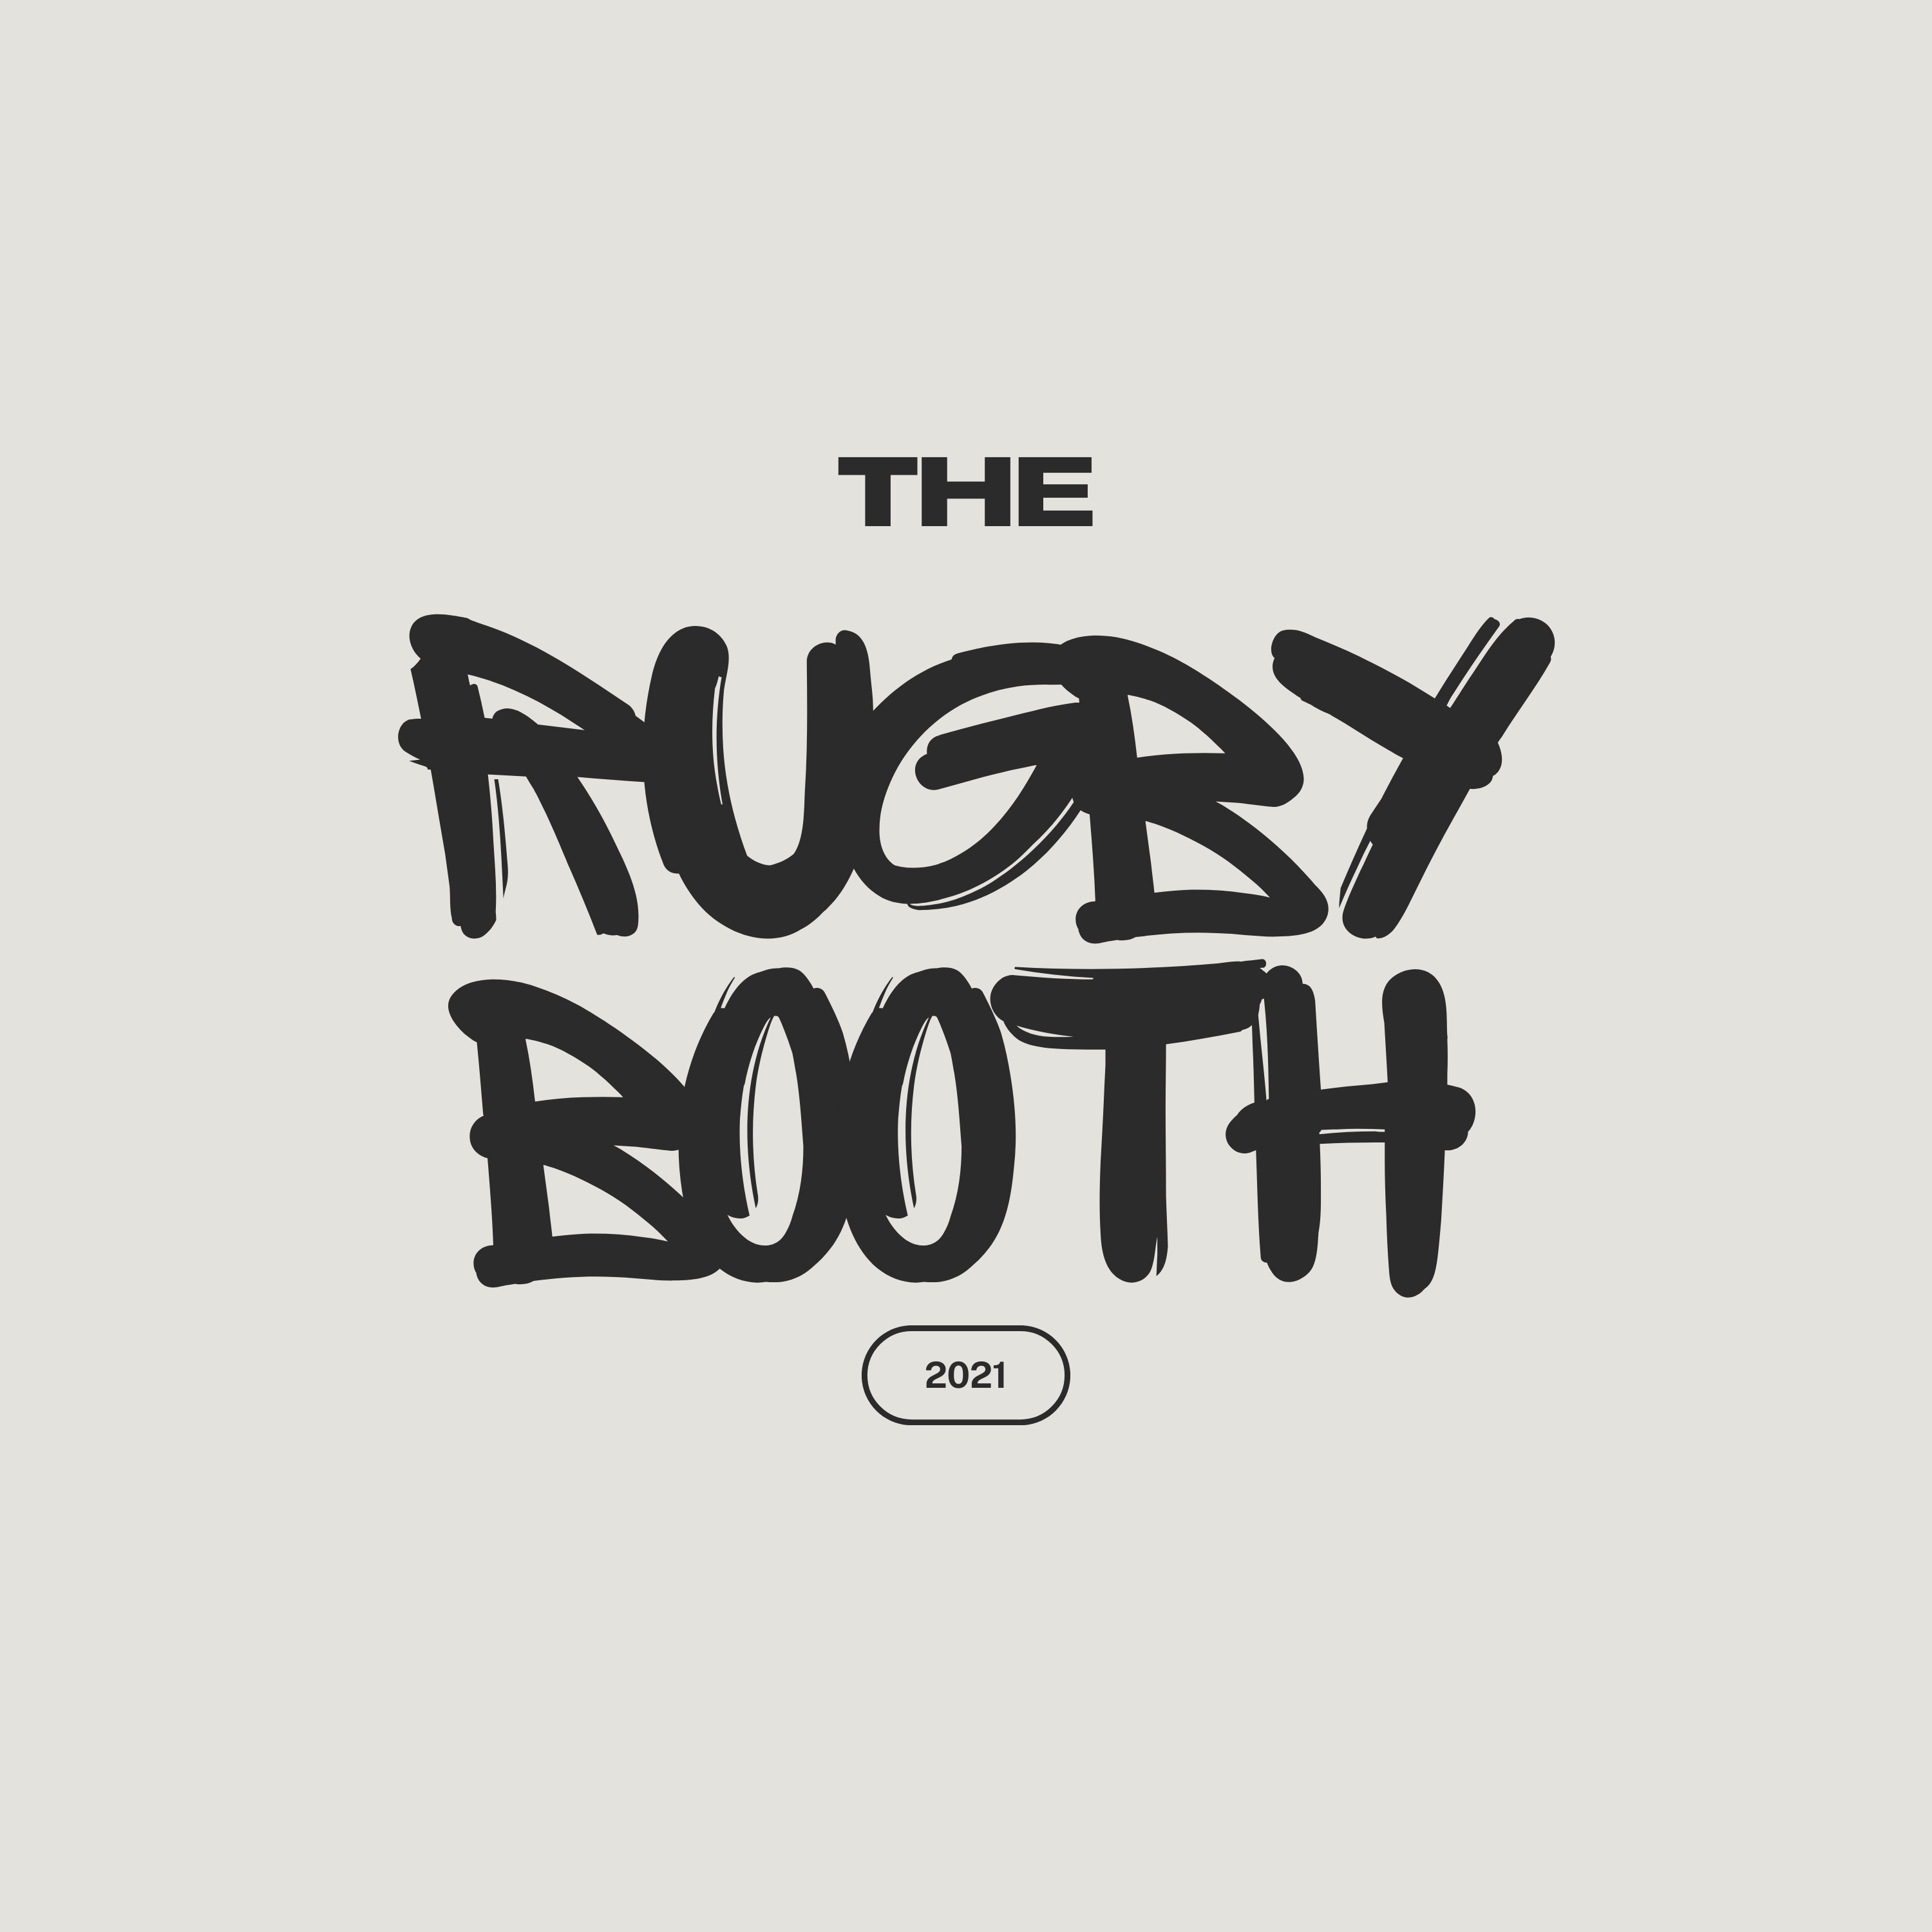 That Rugby Podcast - Episode 78: Super Rugby Surprises, International Rivalries, and European Champions